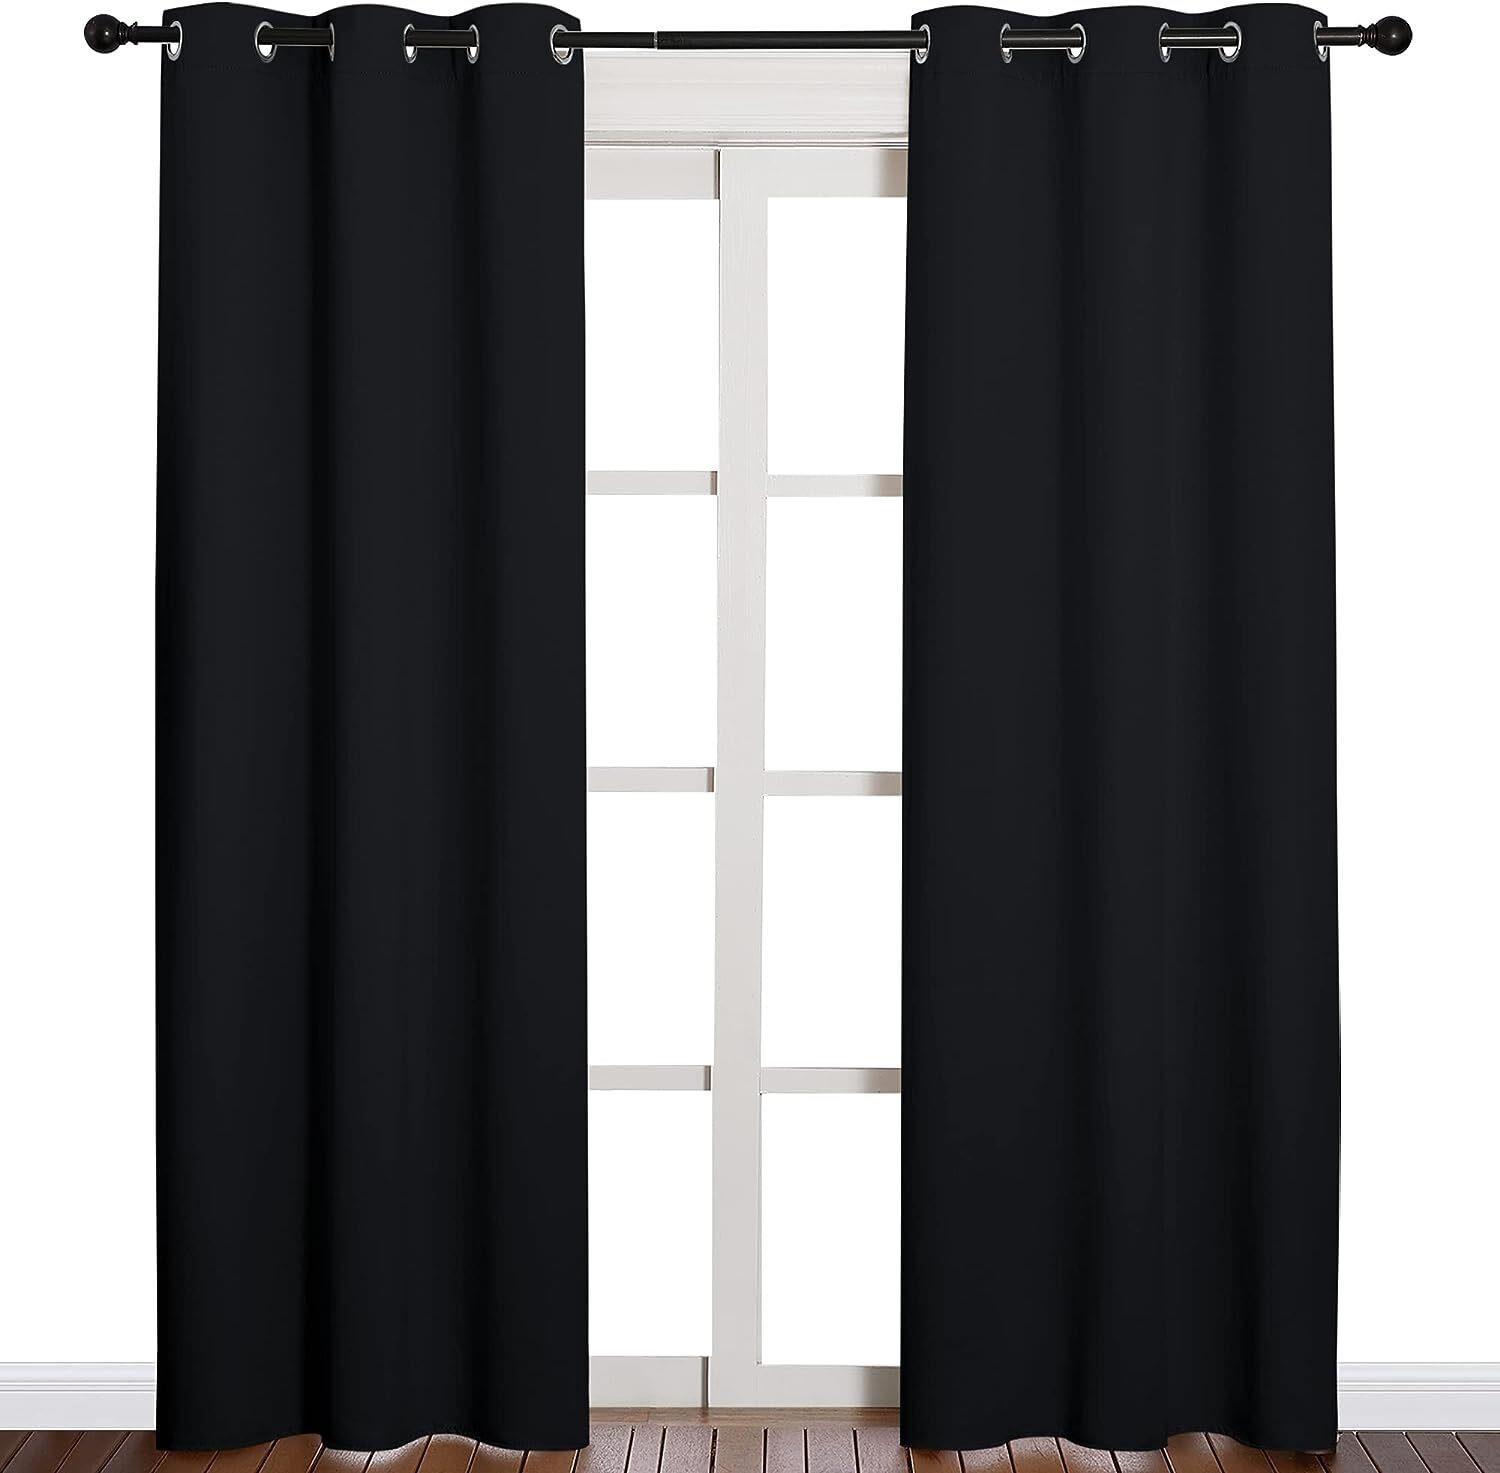 NICETOWN Blackout Curtains 42x84 in  2 Panels Set